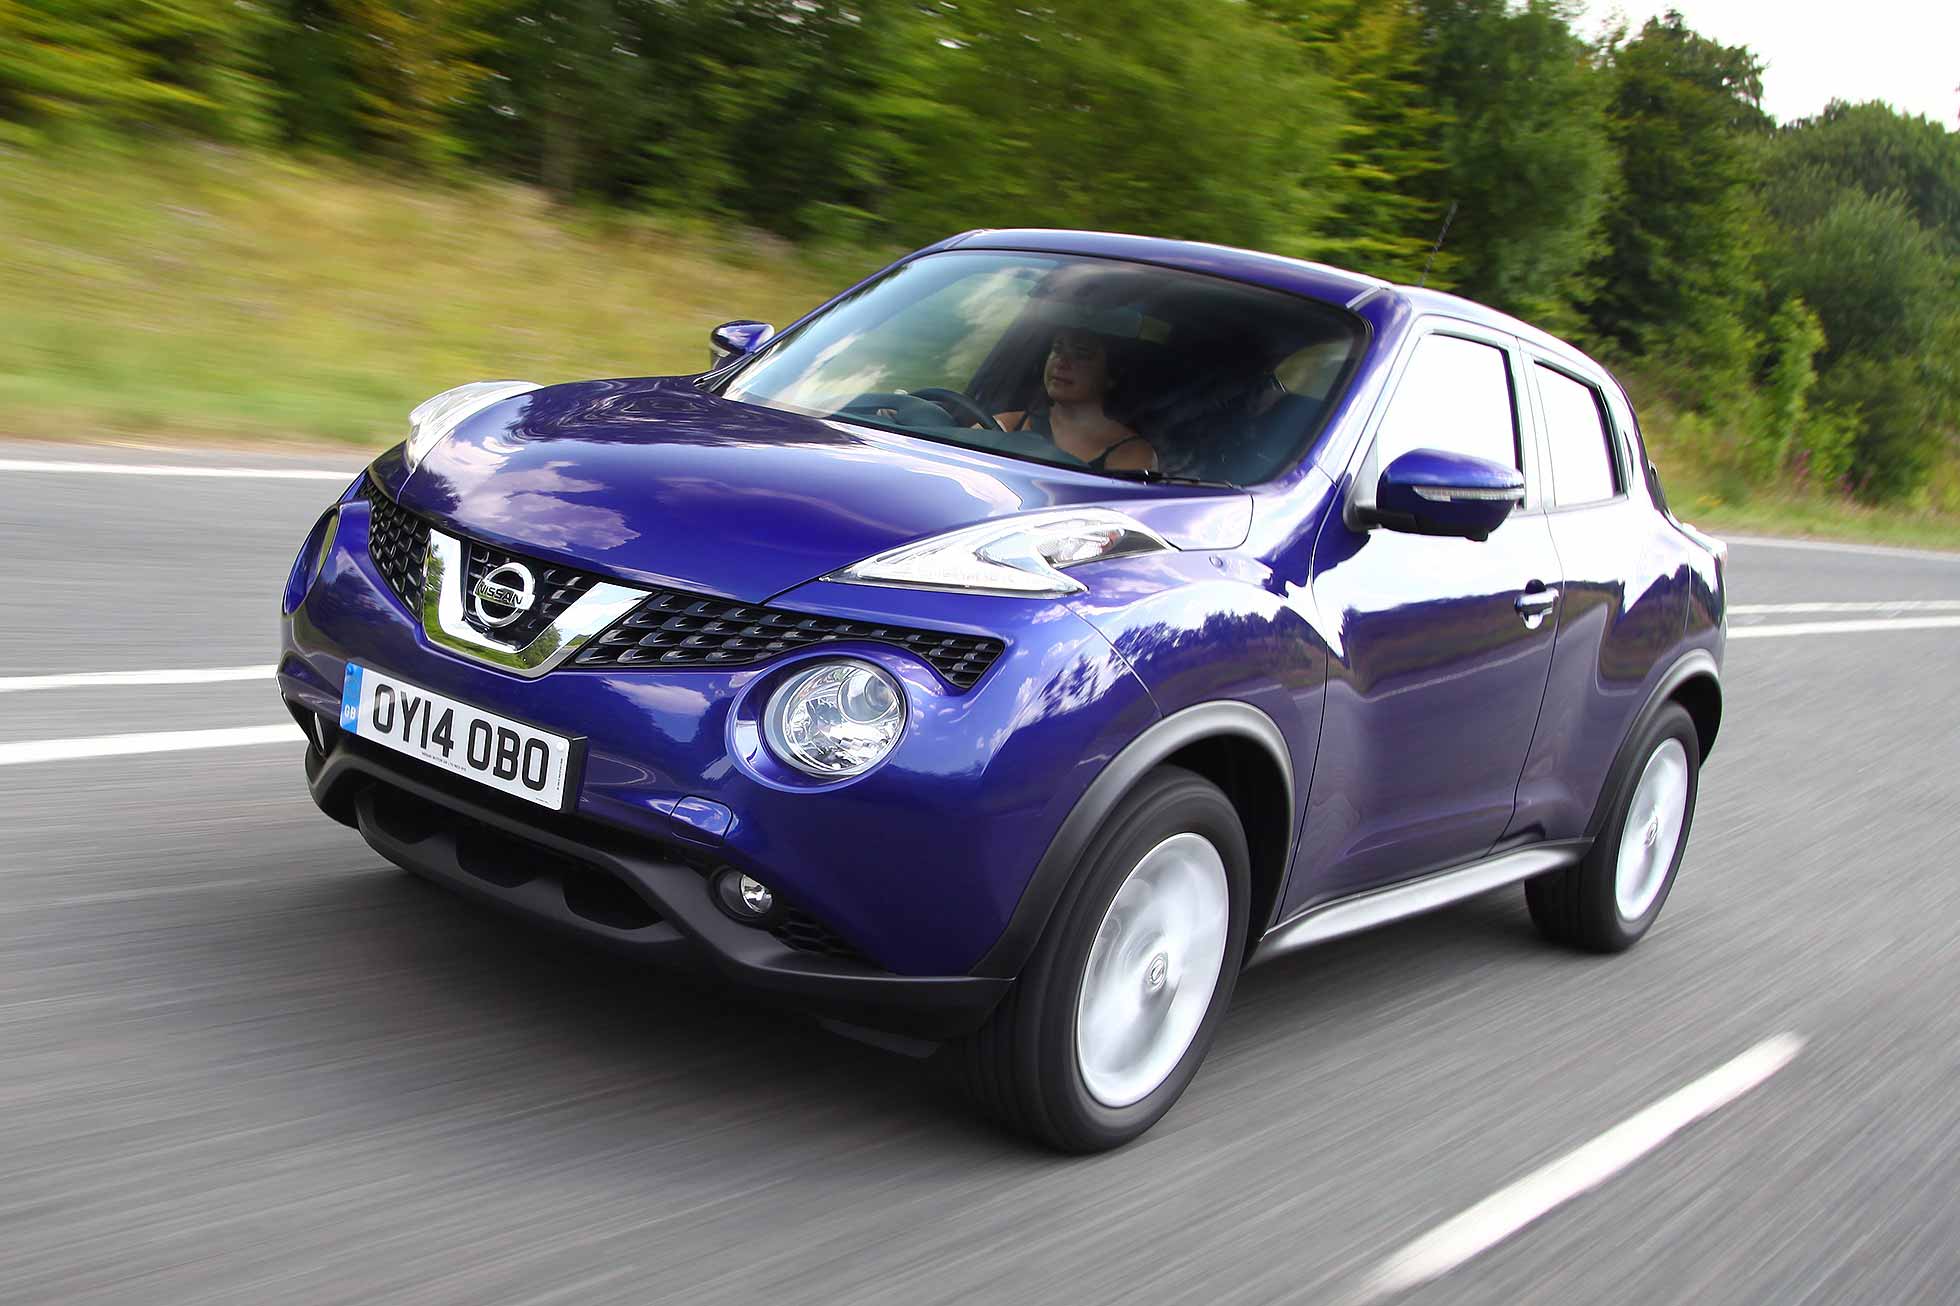 Nissan Juke 2012 - Photos All Recommendation